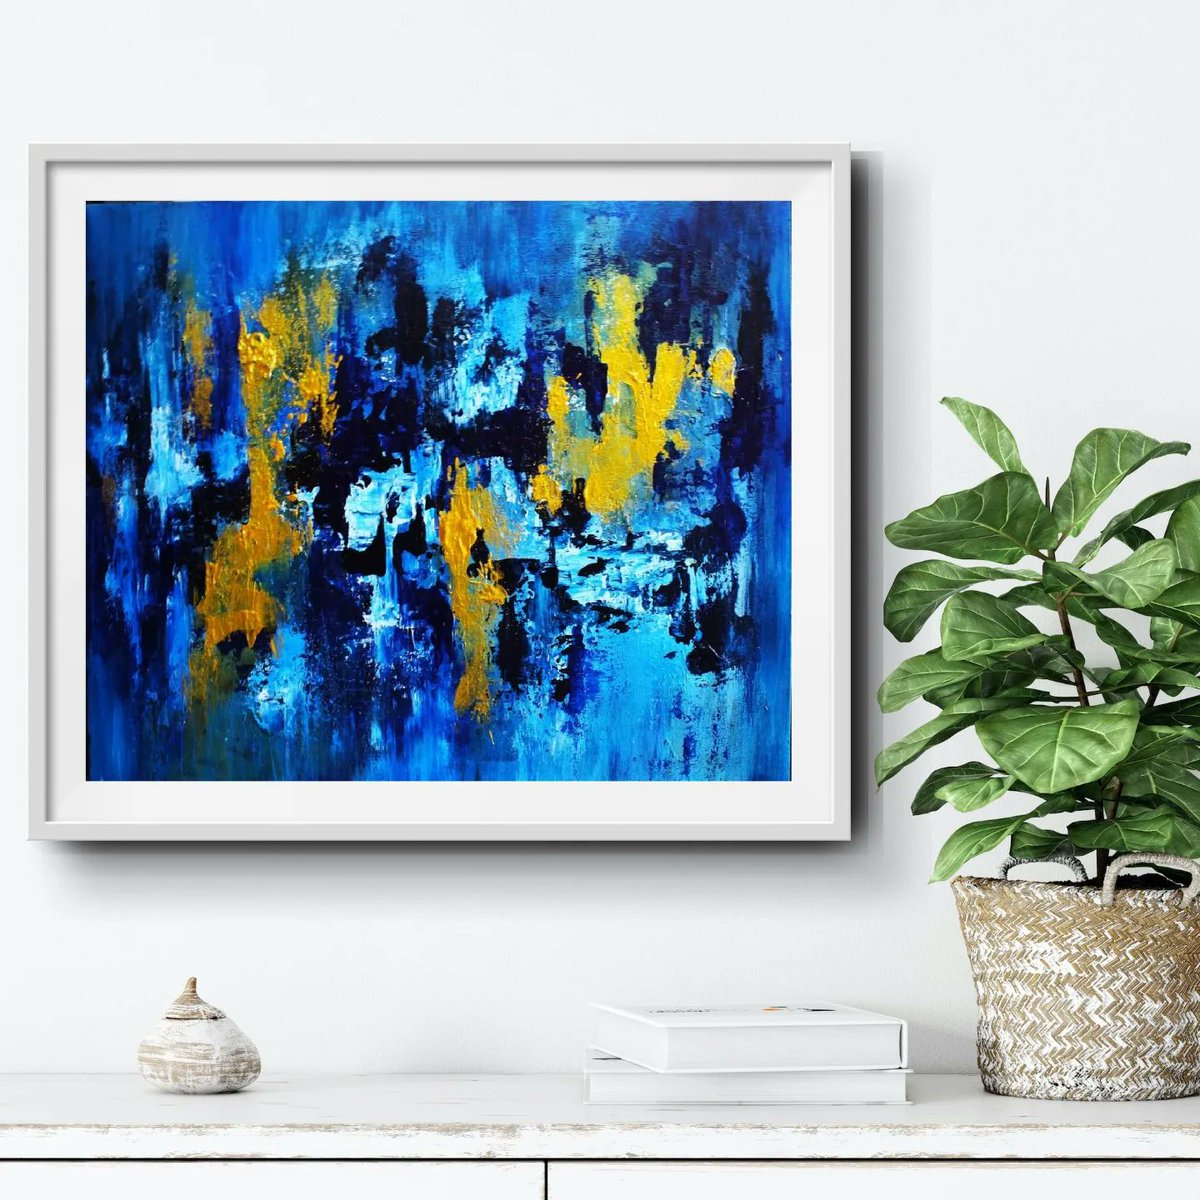 Blue Moon

'Beloved, you are as rare as the blue moon.' - Hanna

#abstractpainting #lovequ #soulmate #fineart #homedecor #homeinterior